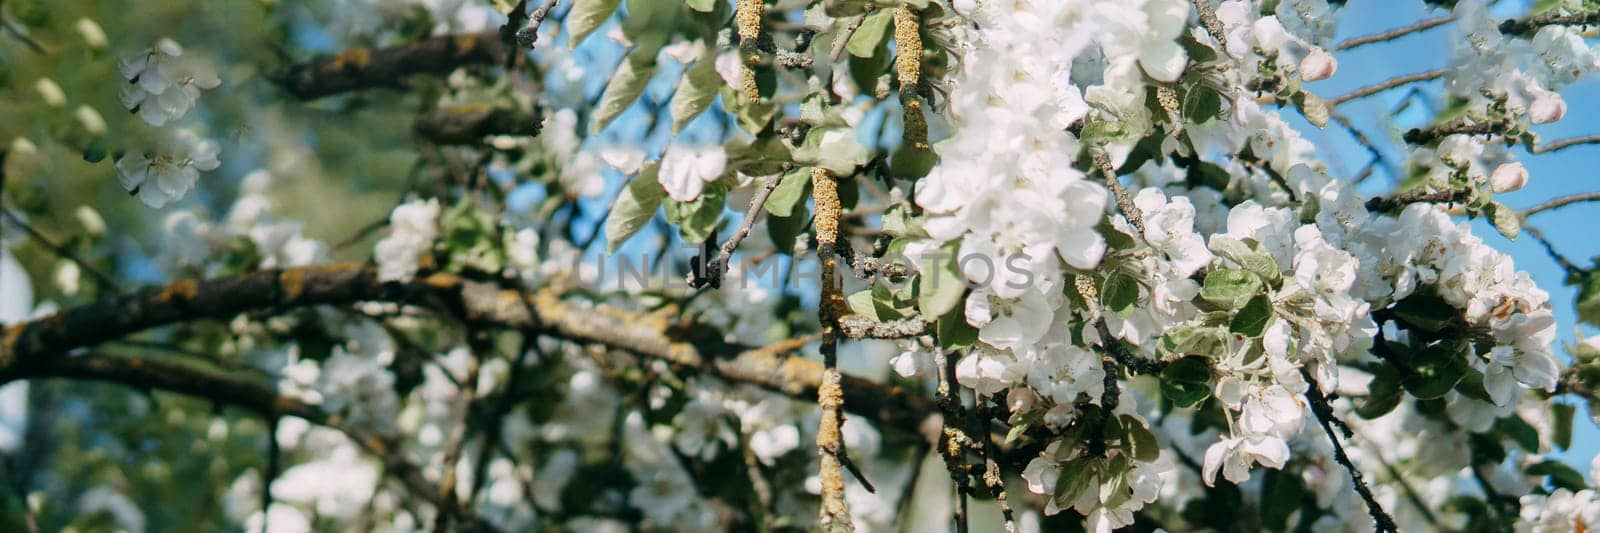 Blooming Apple tree branches with white flowers close-up. by Annu1tochka